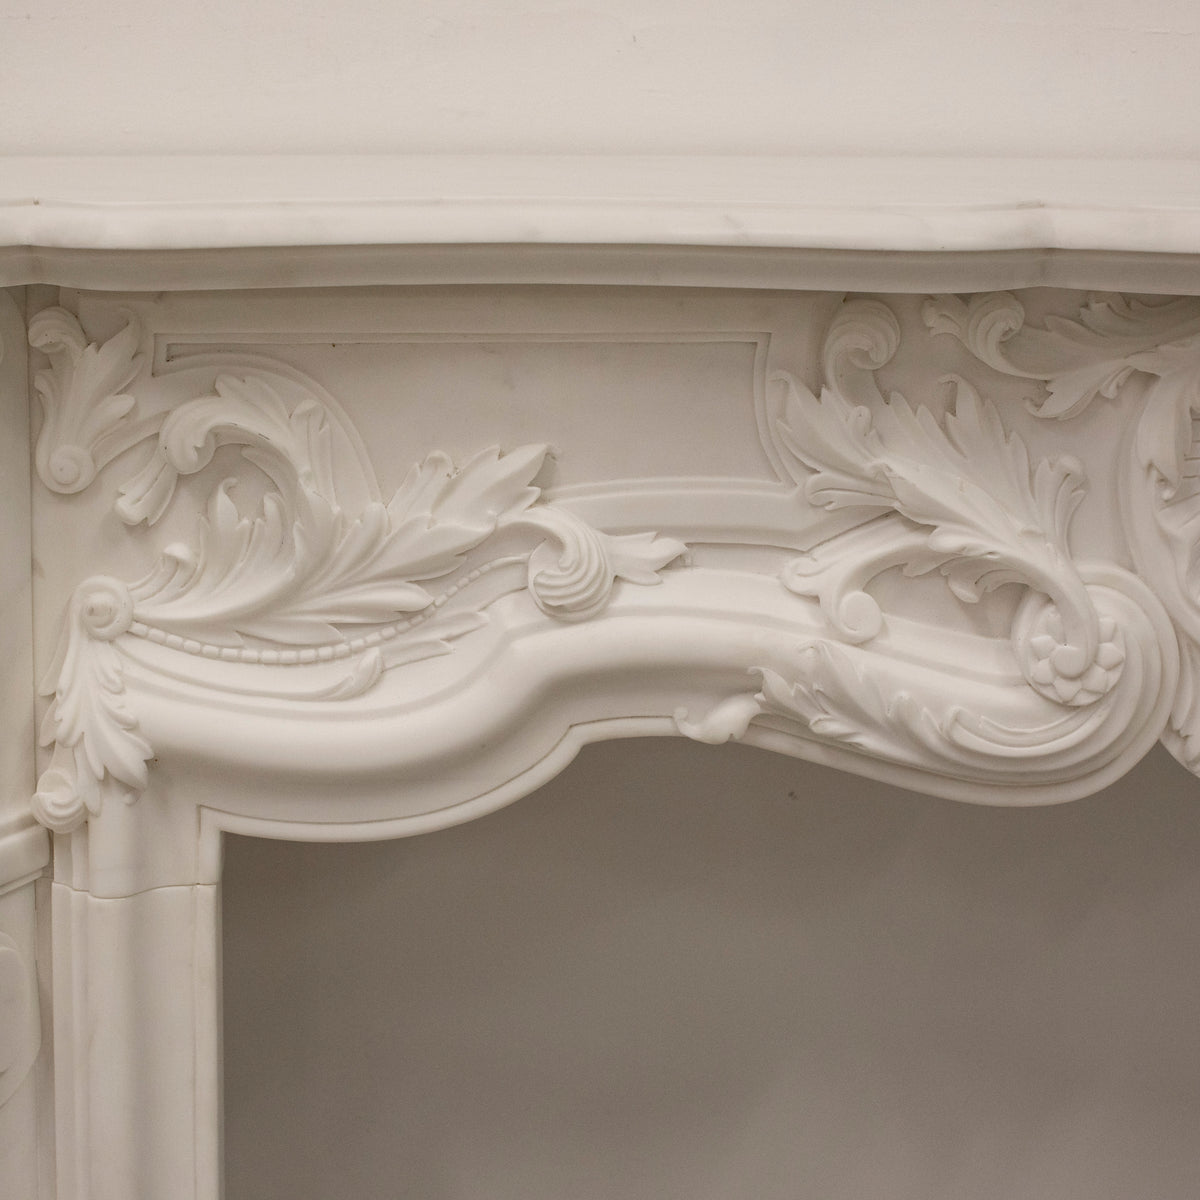 French Louis XV Fireplace Surround in Statuary Marble I Pair available | The Architectural Forum